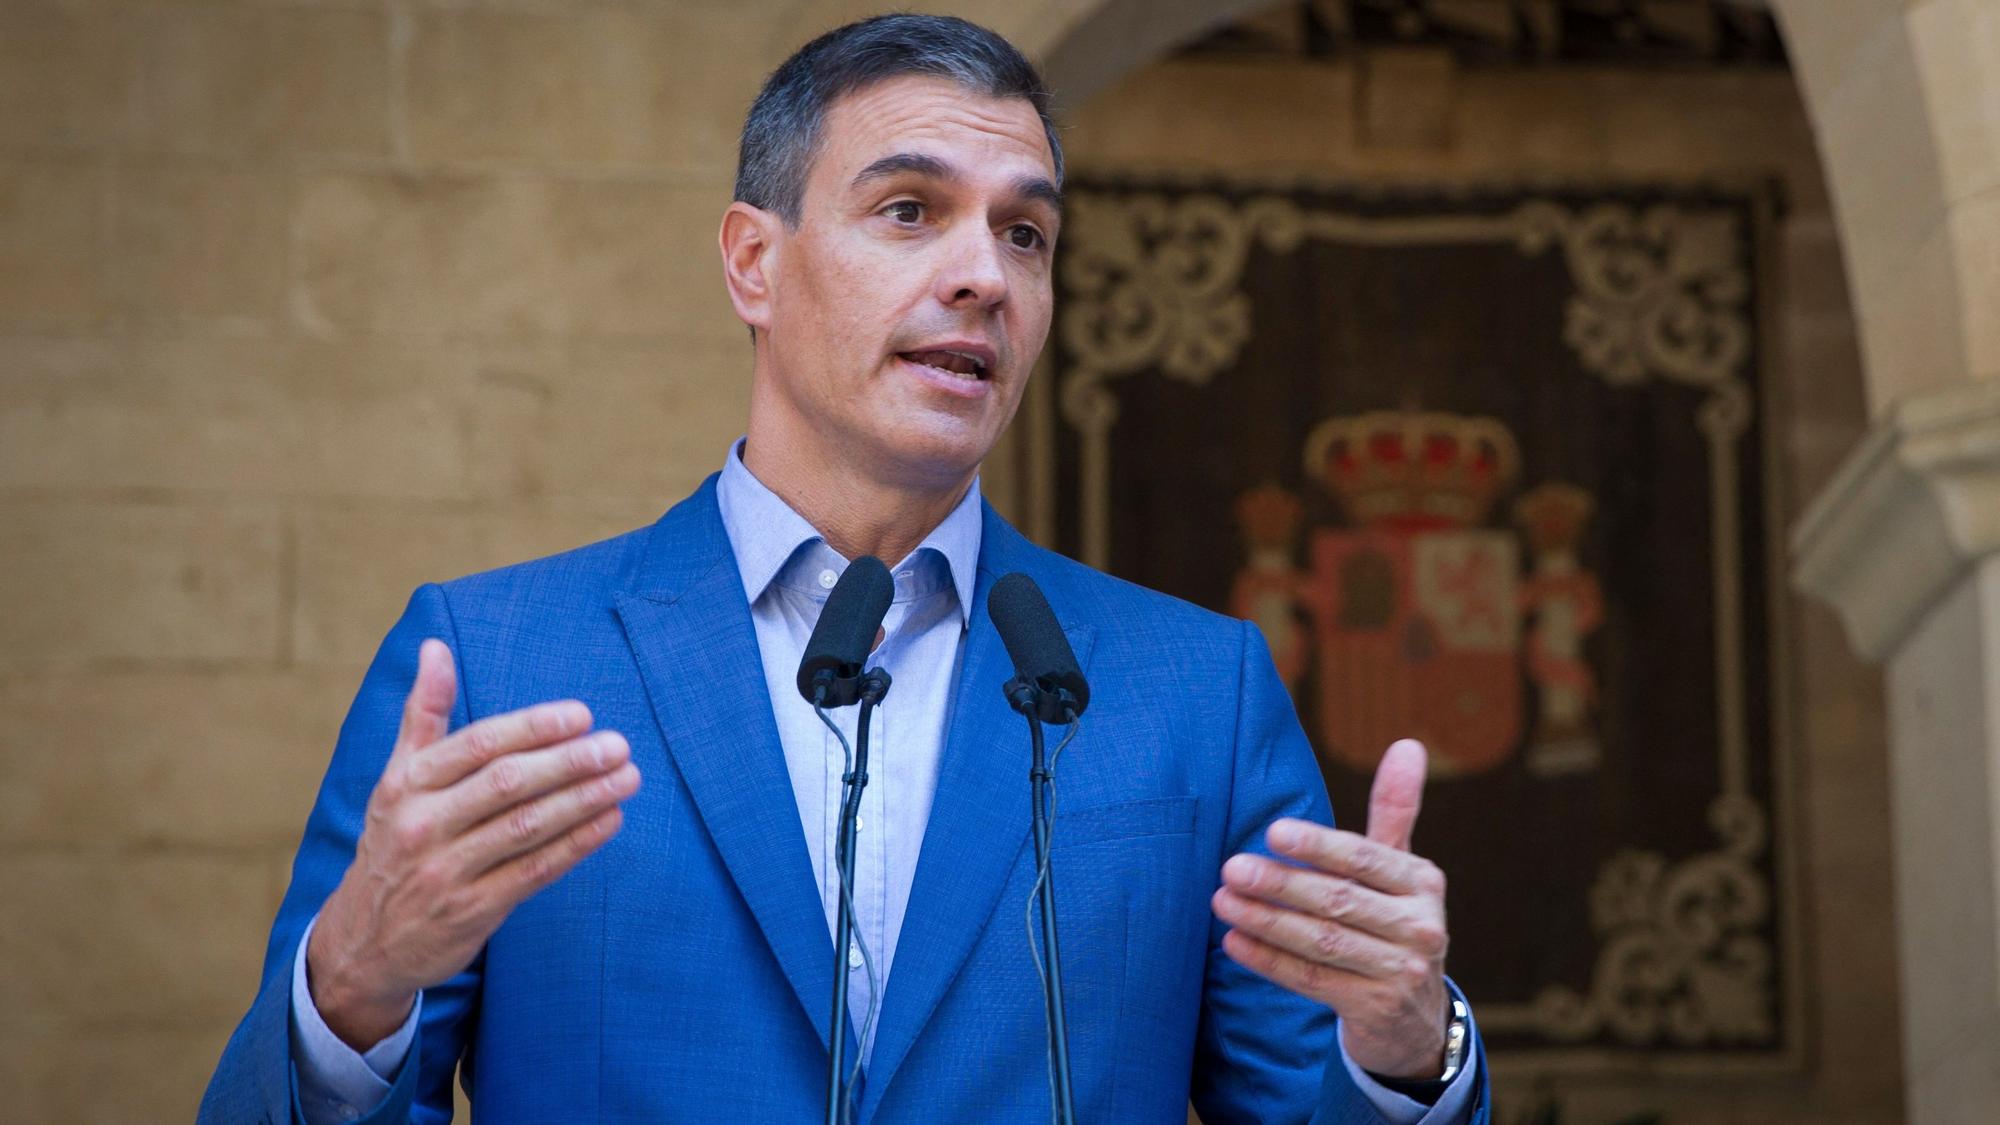 Spanish Prime Minister Pedro Sanchez addresses journalists after a meeting with the Spanish king at the Almudaina Palace in Palma de Mallorca on August 2, 2022. (Photo by JAIME REINA / AFP)